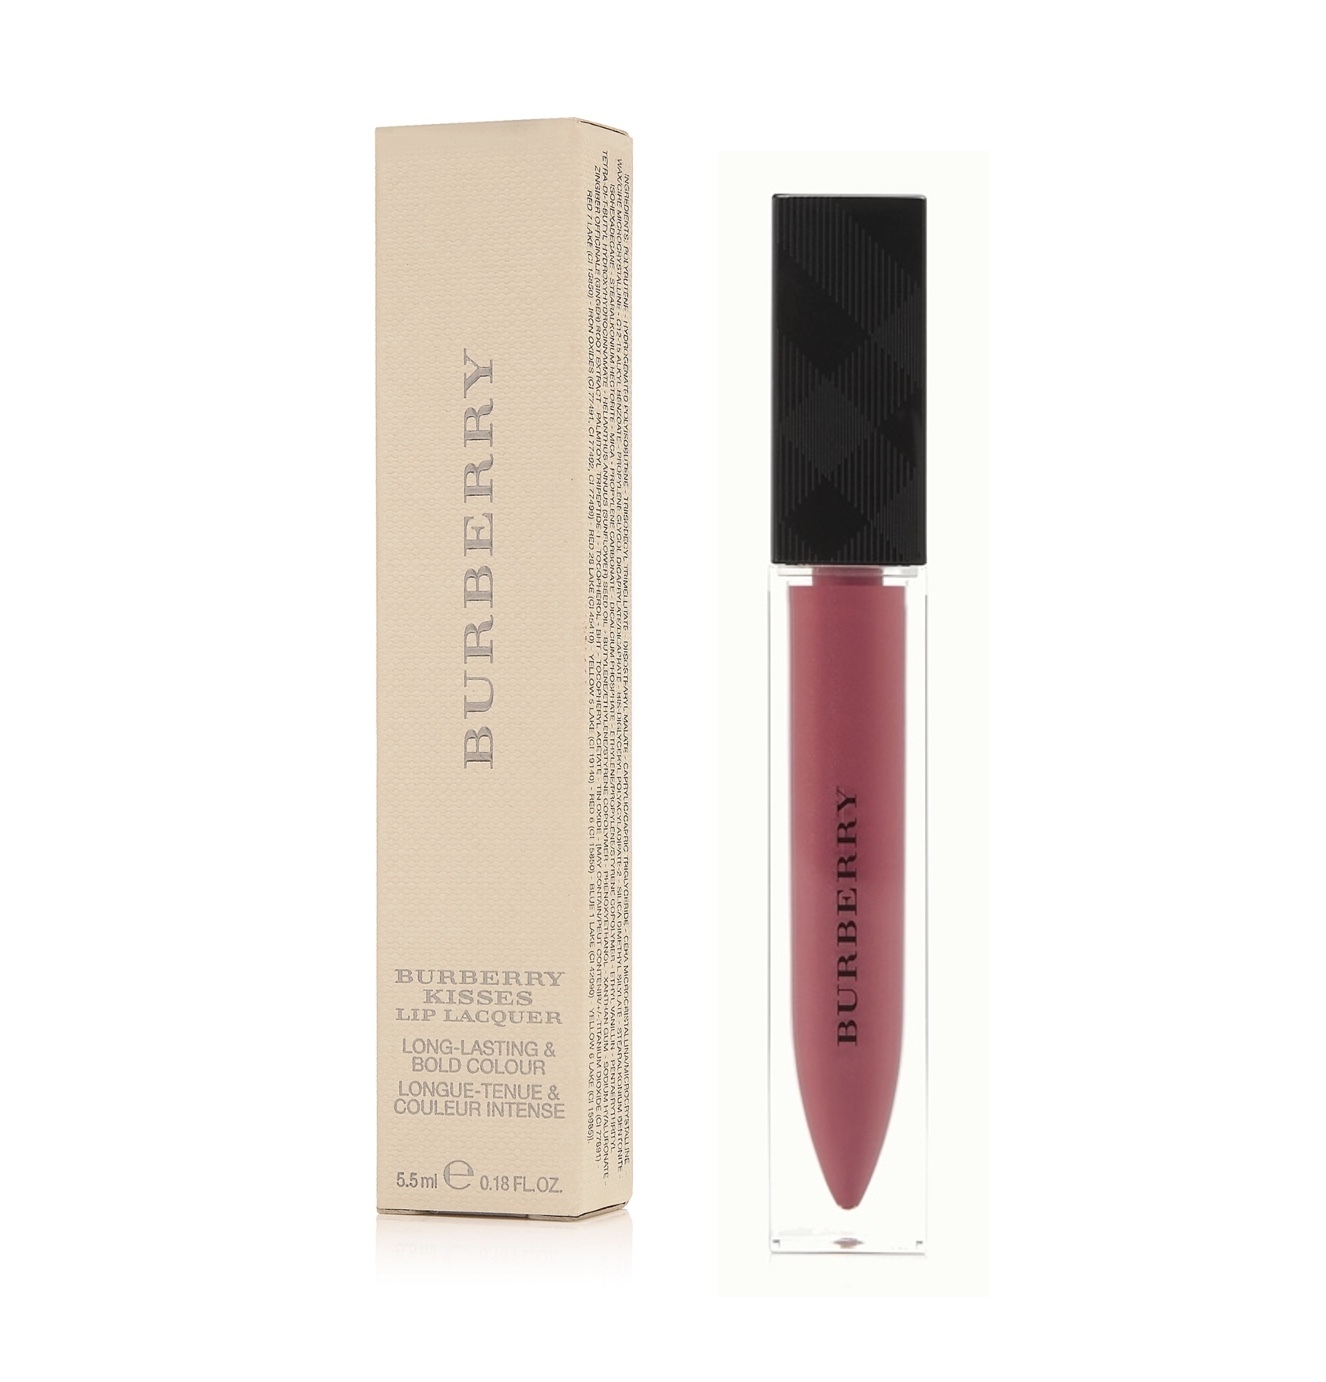 BURBERRY BEAUTY Kisses Lip Lacquer in ROSEWOOD No.16